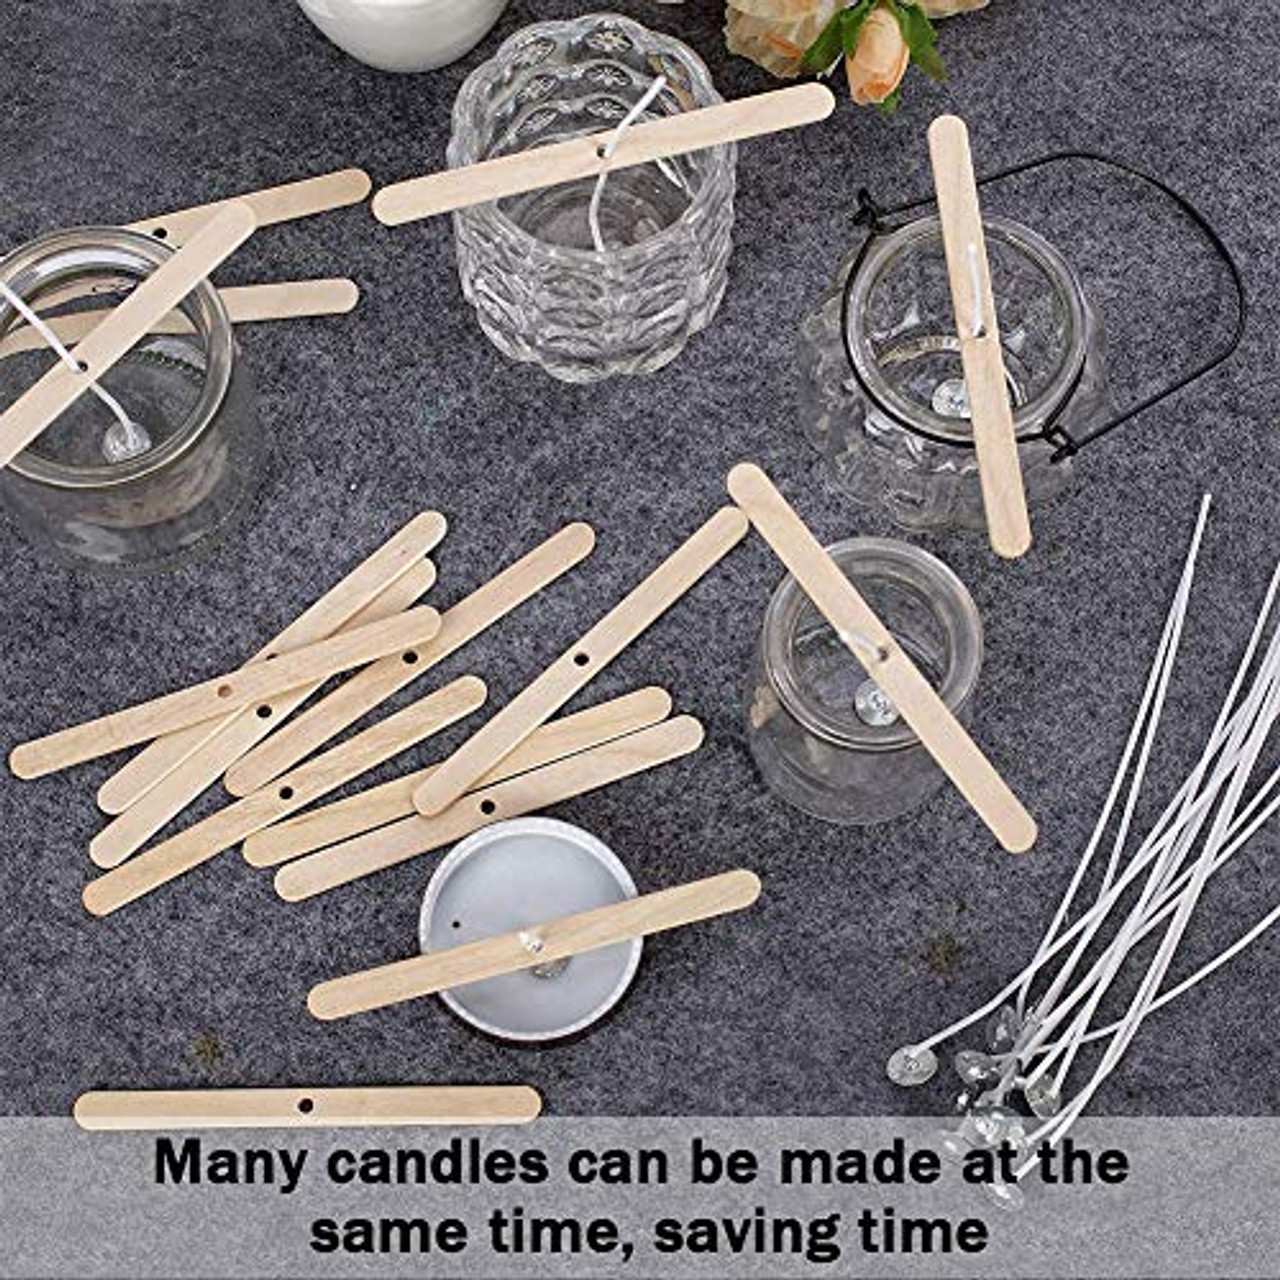 Wooden Candle Wick Holders Pack of 150pcs Wick Centering Devices